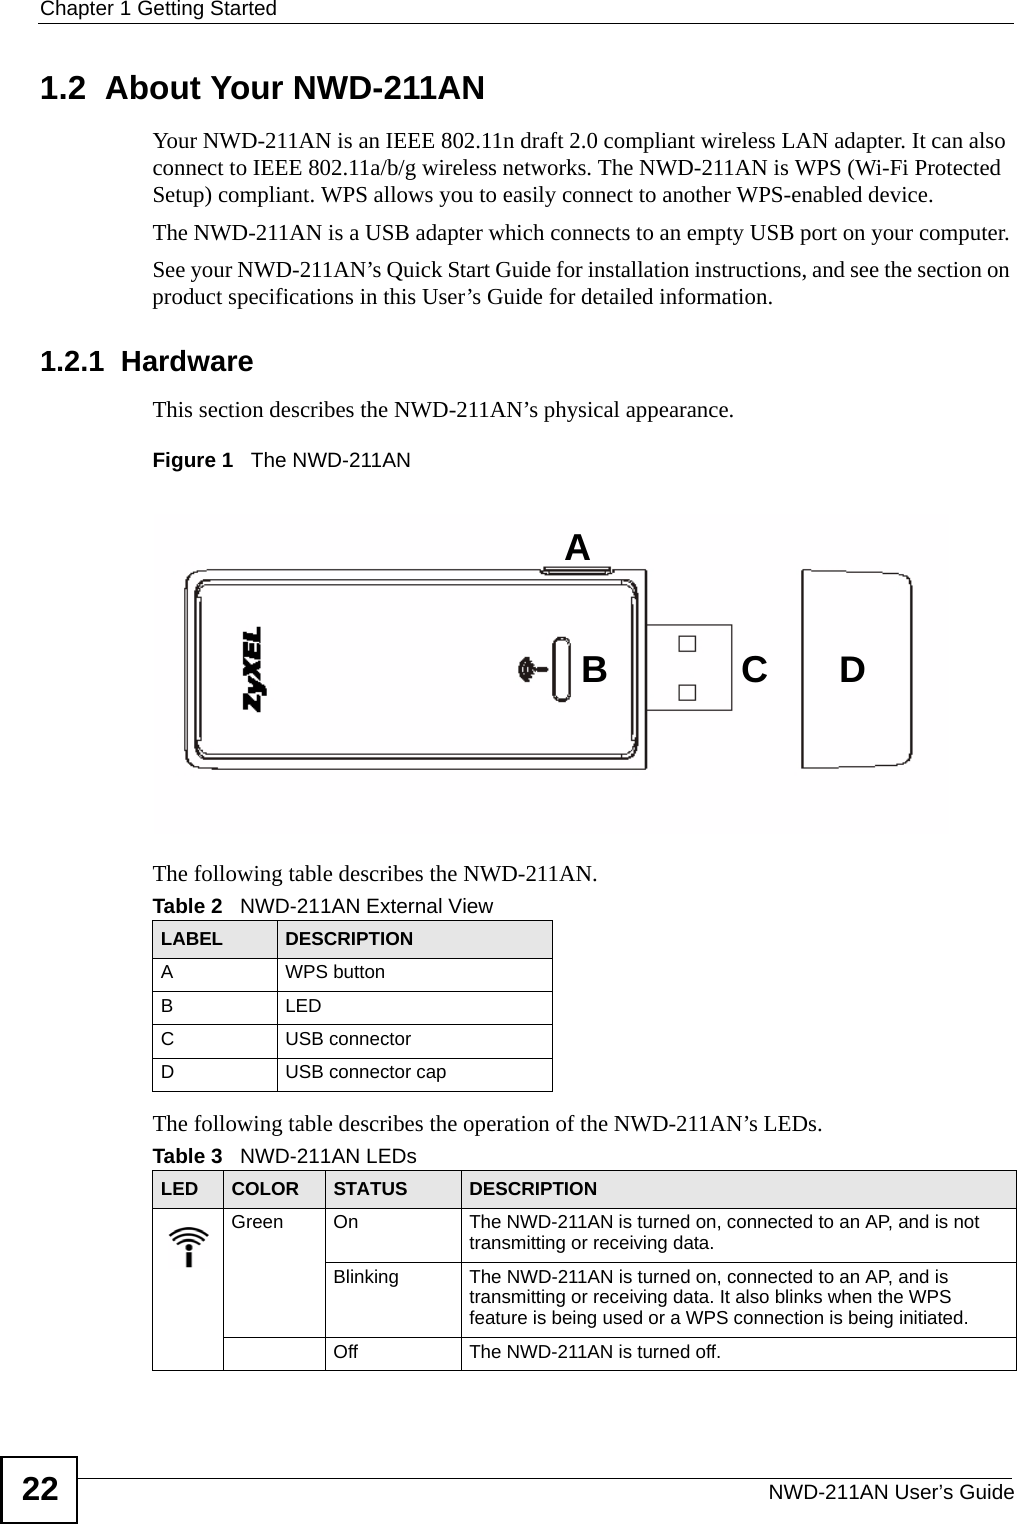 Chapter 1 Getting StartedNWD-211AN User’s Guide221.2  About Your NWD-211AN    Your NWD-211AN is an IEEE 802.11n draft 2.0 compliant wireless LAN adapter. It can also connect to IEEE 802.11a/b/g wireless networks. The NWD-211AN is WPS (Wi-Fi Protected Setup) compliant. WPS allows you to easily connect to another WPS-enabled device. The NWD-211AN is a USB adapter which connects to an empty USB port on your computer.See your NWD-211AN’s Quick Start Guide for installation instructions, and see the section on product specifications in this User’s Guide for detailed information.1.2.1  HardwareThis section describes the NWD-211AN’s physical appearance.Figure 1   The NWD-211ANThe following table describes the NWD-211AN.The following table describes the operation of the NWD-211AN’s LEDs.Table 2   NWD-211AN External ViewLABEL DESCRIPTIONA WPS buttonBLEDC USB connectorD USB connector capTable 3   NWD-211AN LEDsLED COLOR STATUS DESCRIPTIONGreen On The NWD-211AN is turned on, connected to an AP, and is not transmitting or receiving data.Blinking The NWD-211AN is turned on, connected to an AP, and is transmitting or receiving data. It also blinks when the WPS feature is being used or a WPS connection is being initiated.Off The NWD-211AN is turned off.ABCD